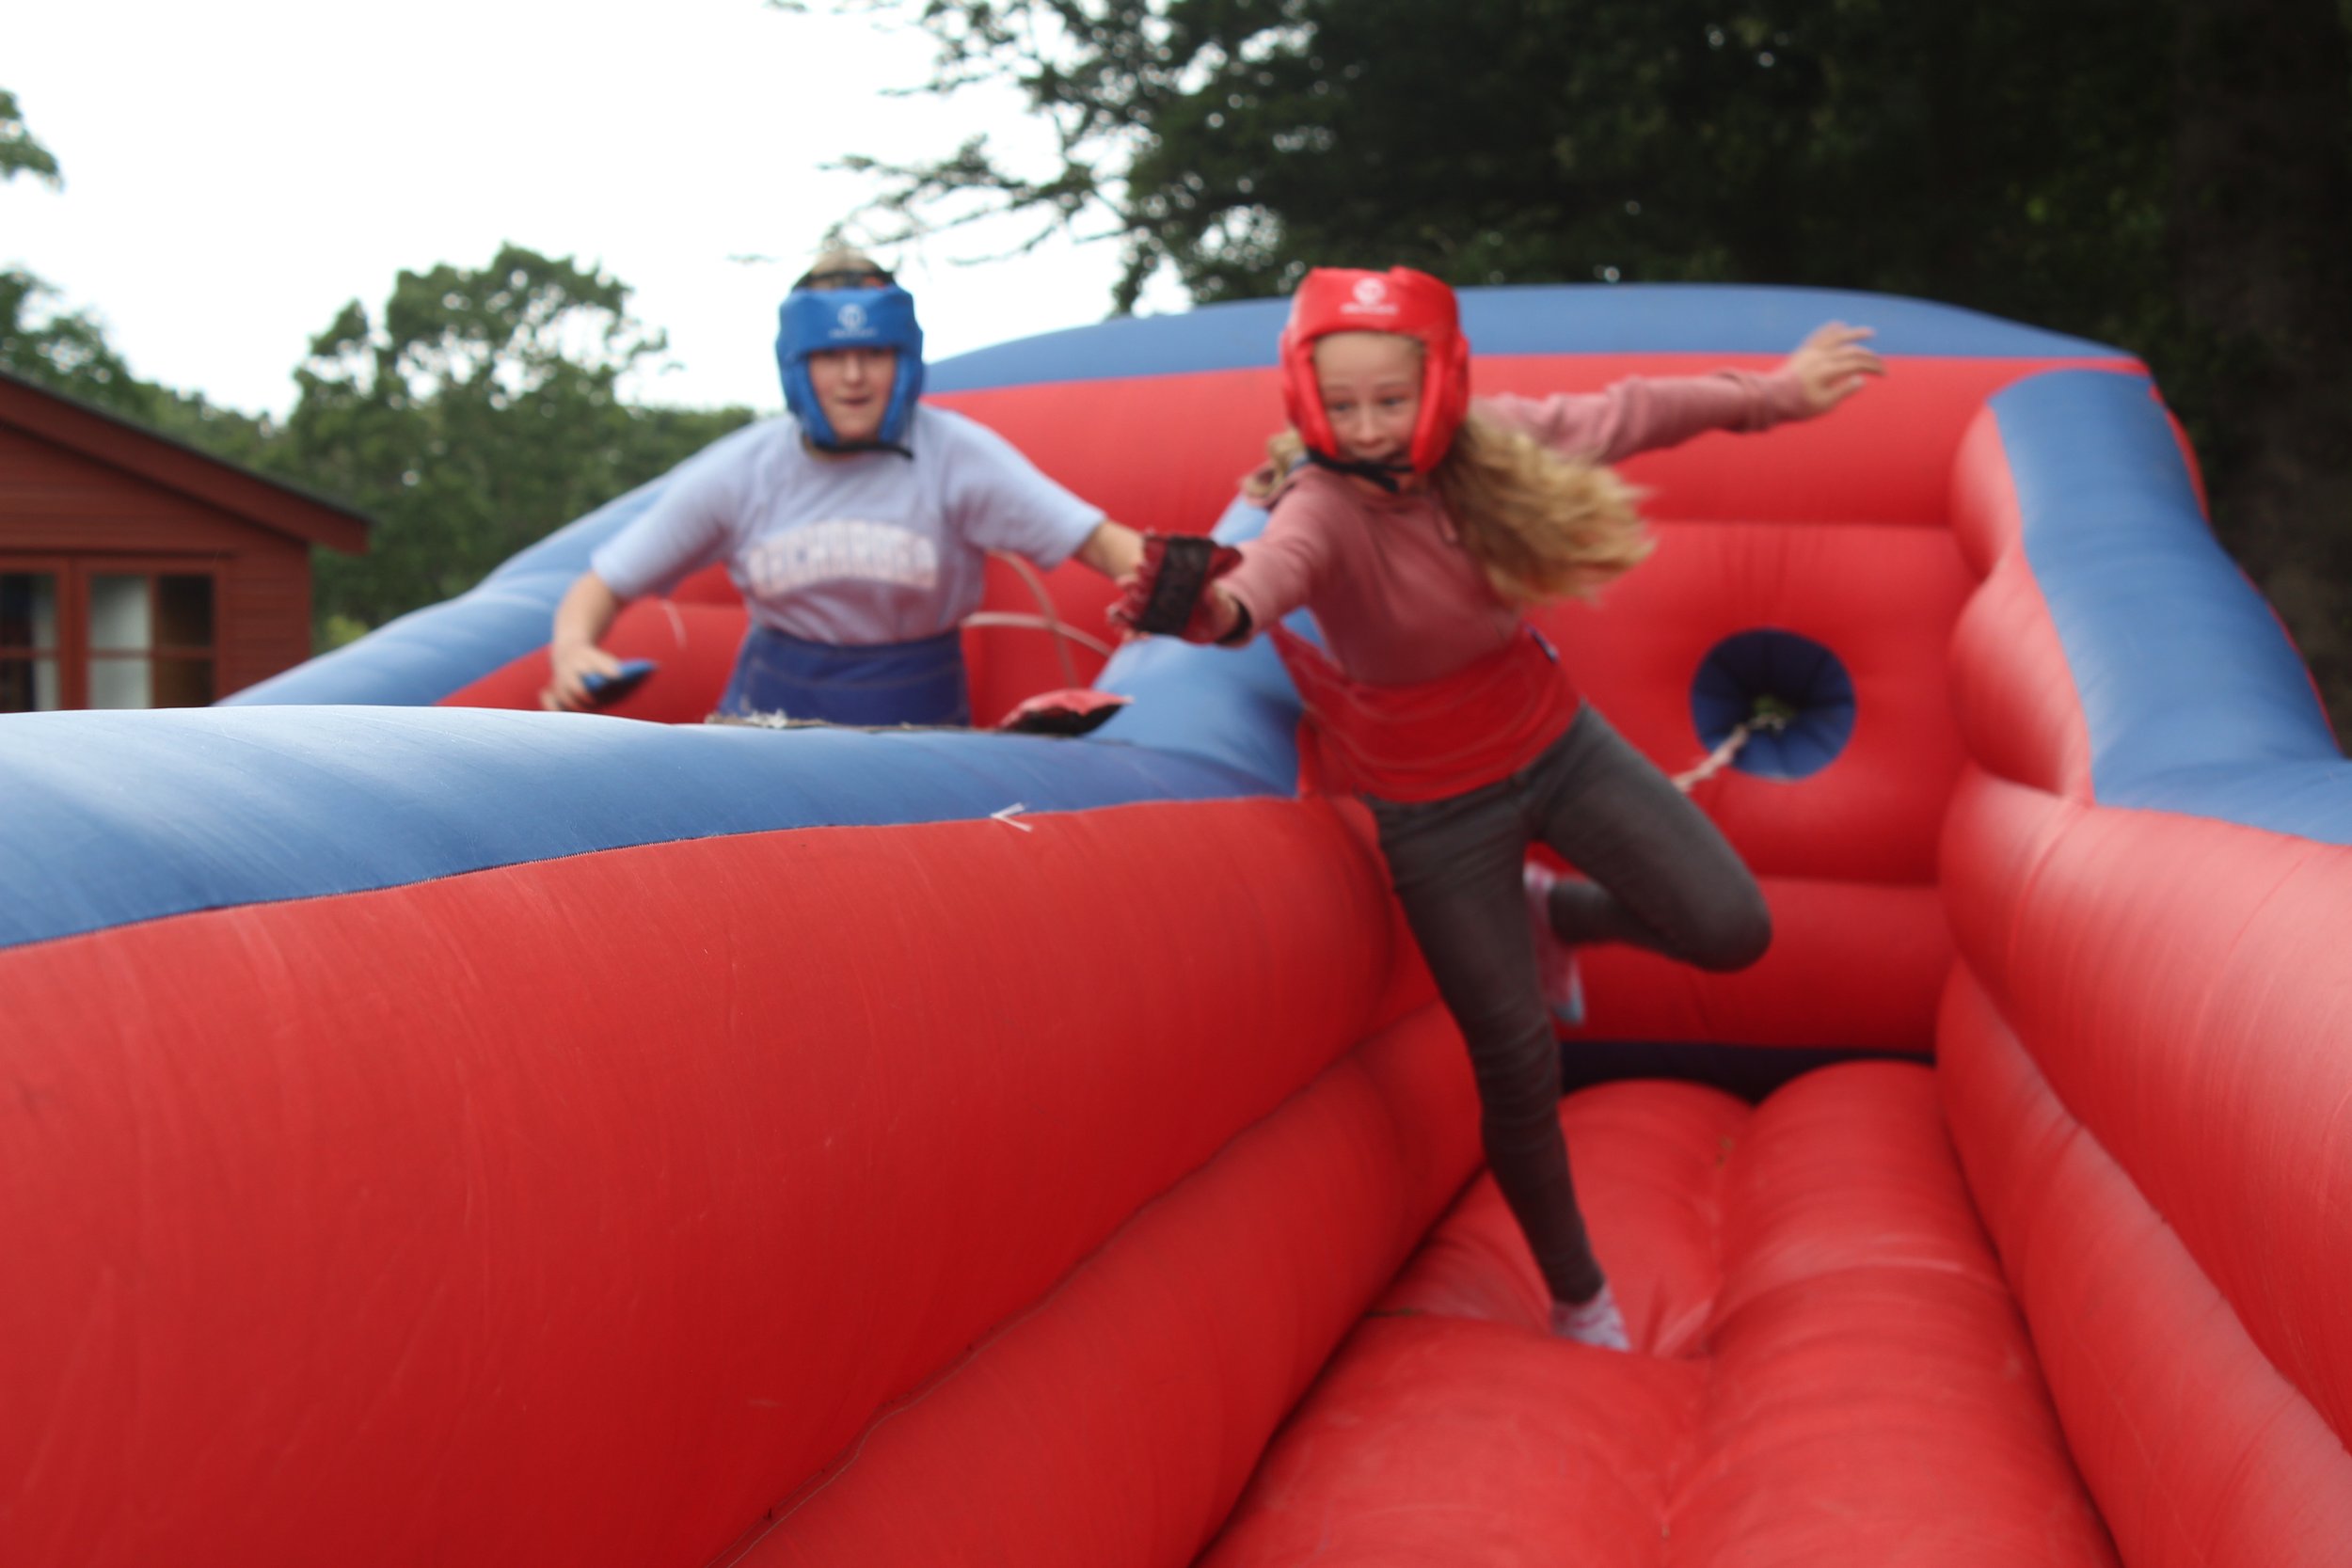 Inflatable challenge on summer camp 2022 (Copy)